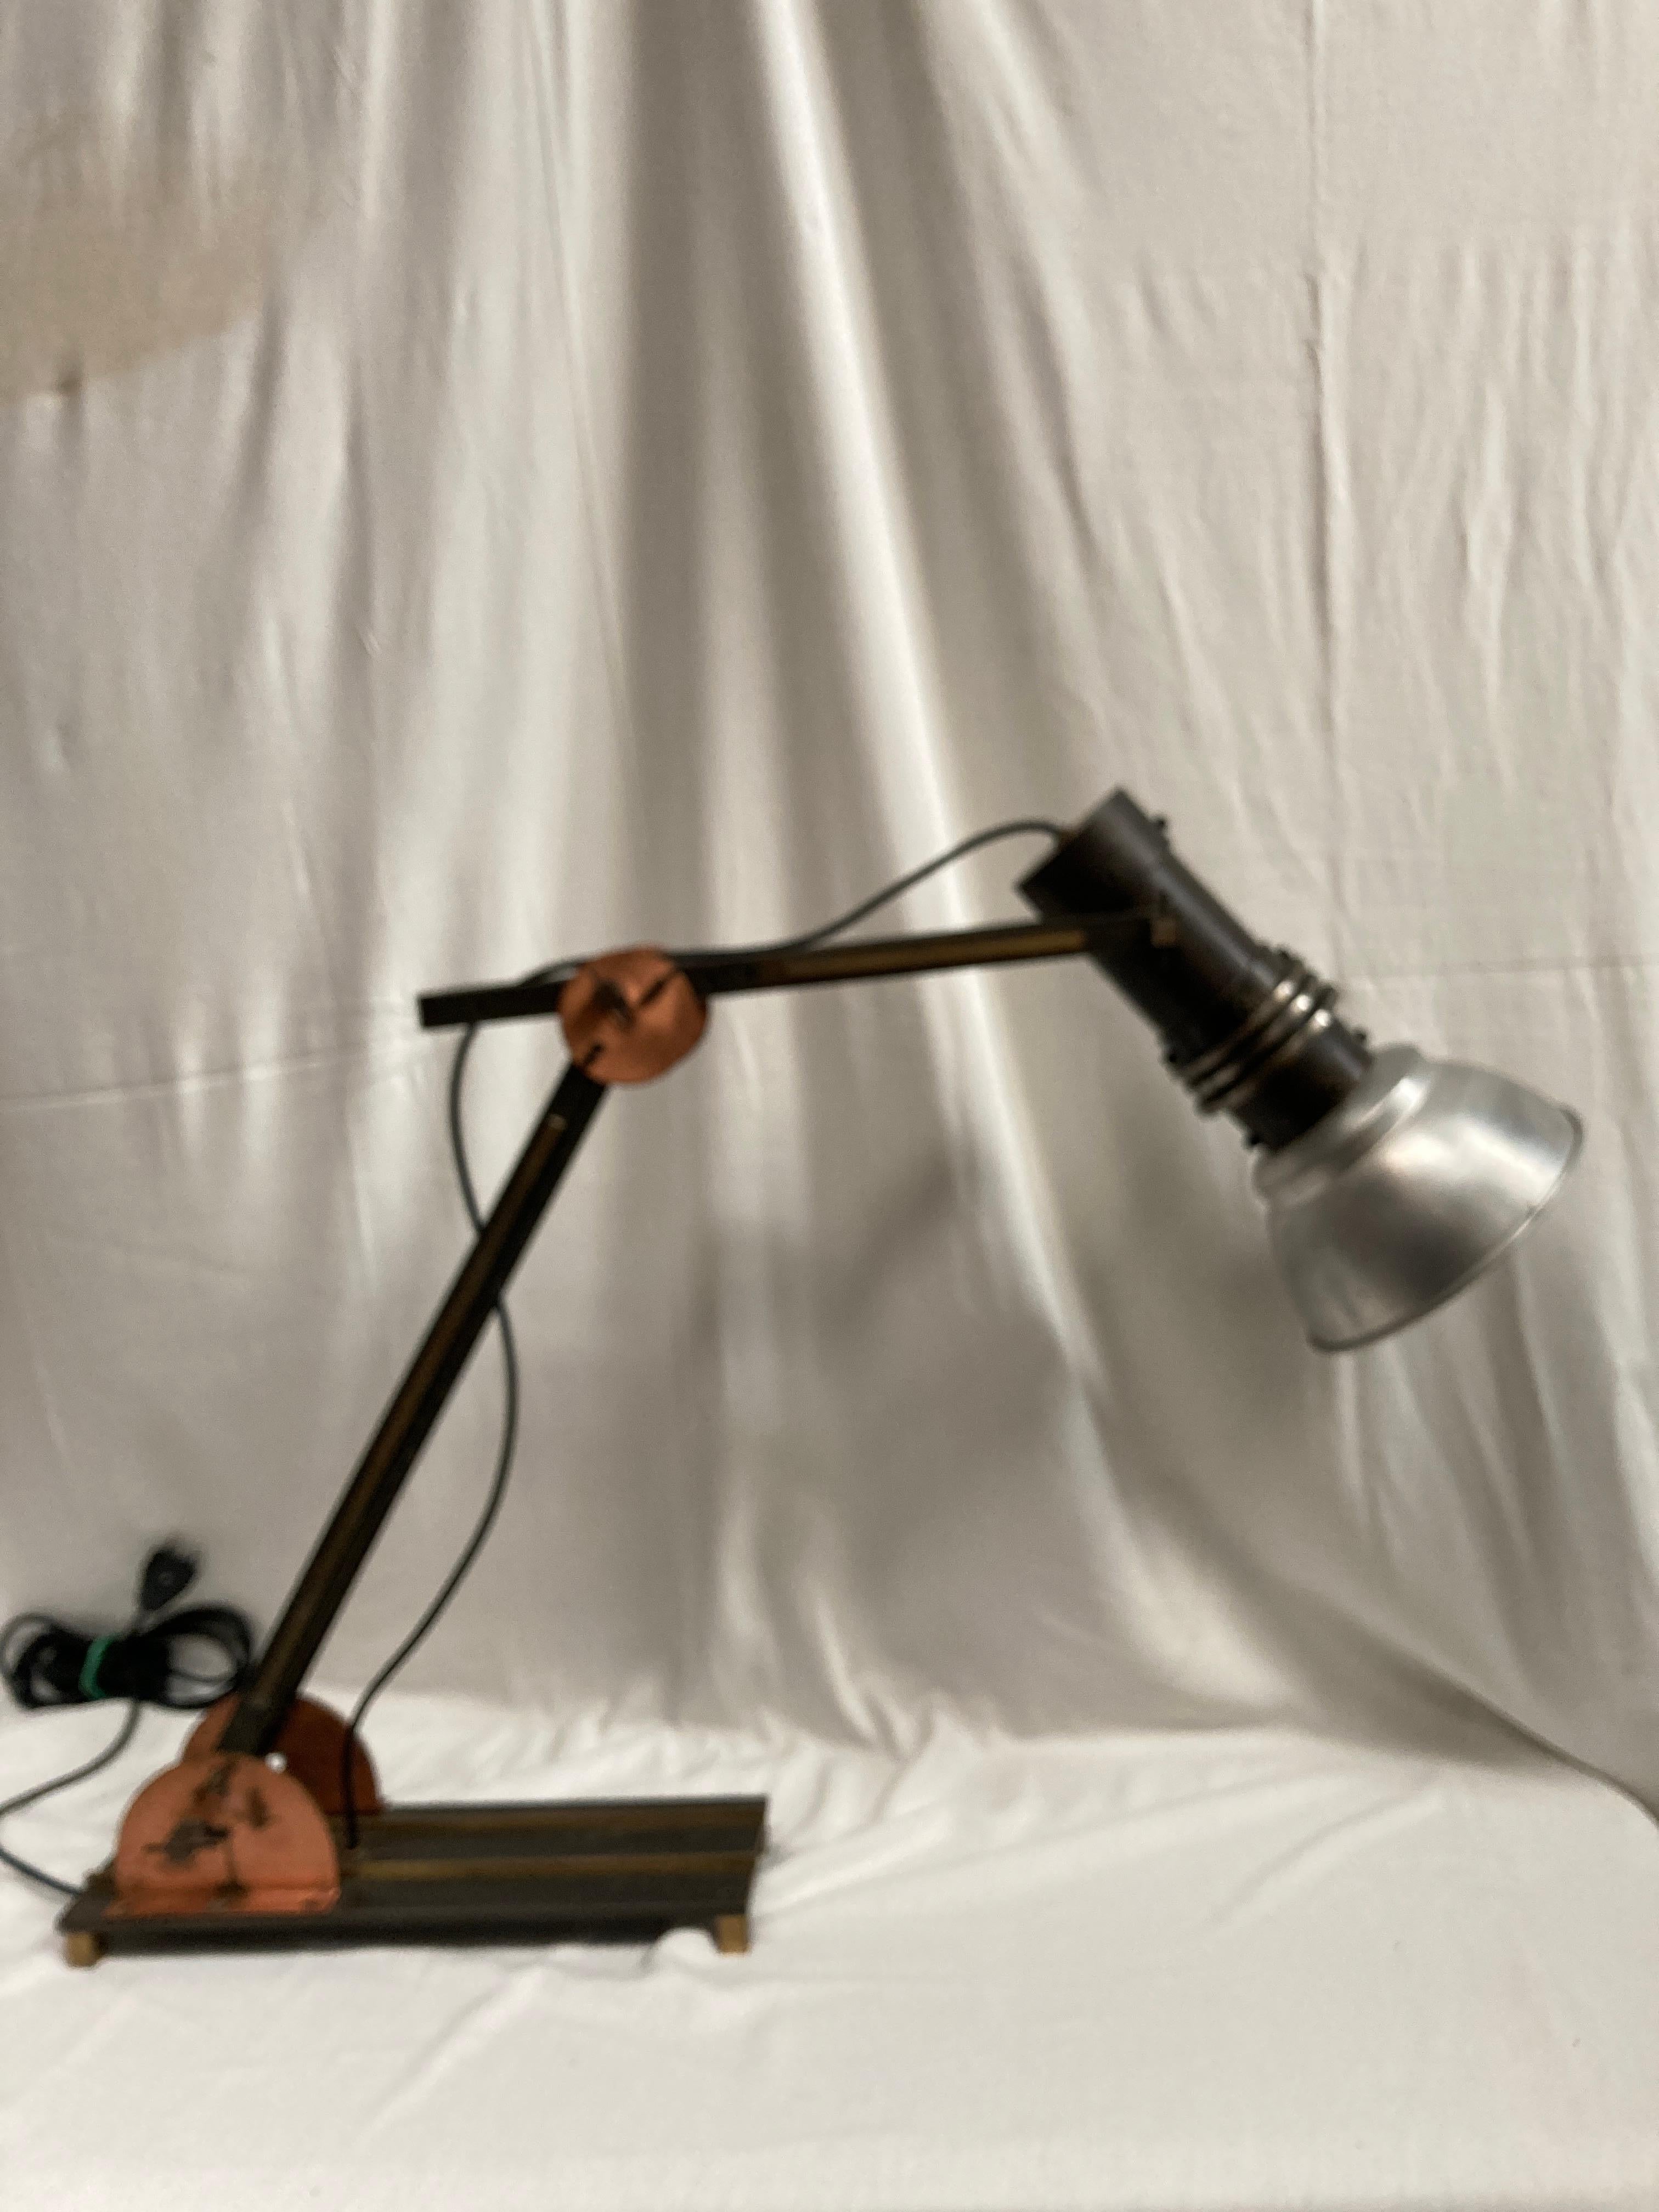 Rare industrial table lamp
Made with metal and copper
One little choc to the shade
Overall good vintage condition
